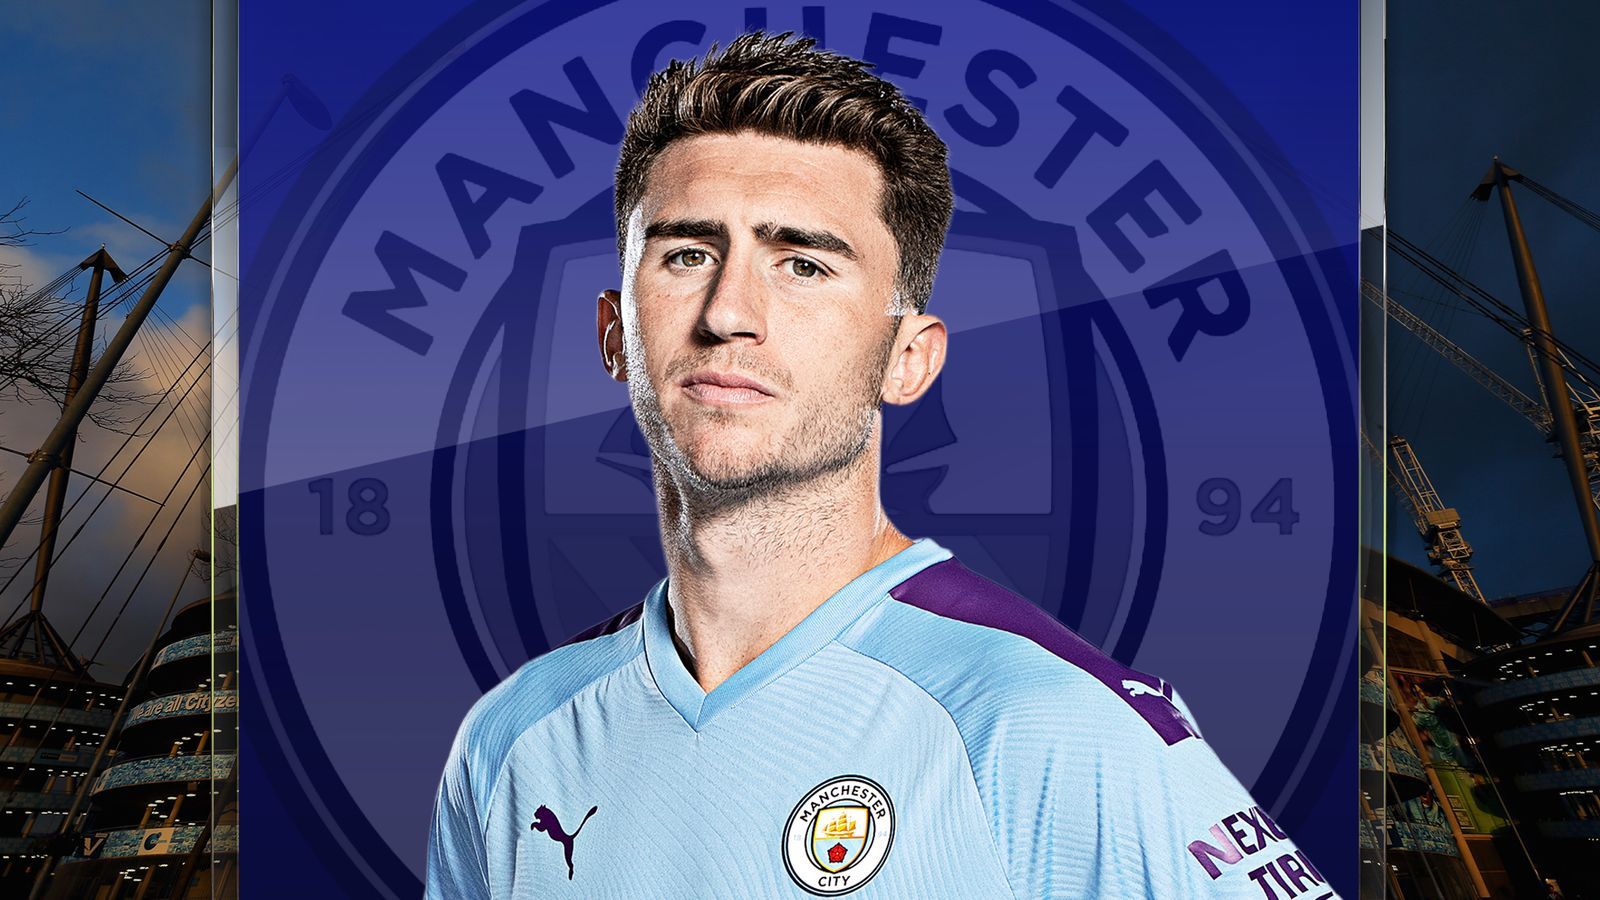 Aymeric Laporte key to Manchester City's play with and without the ball